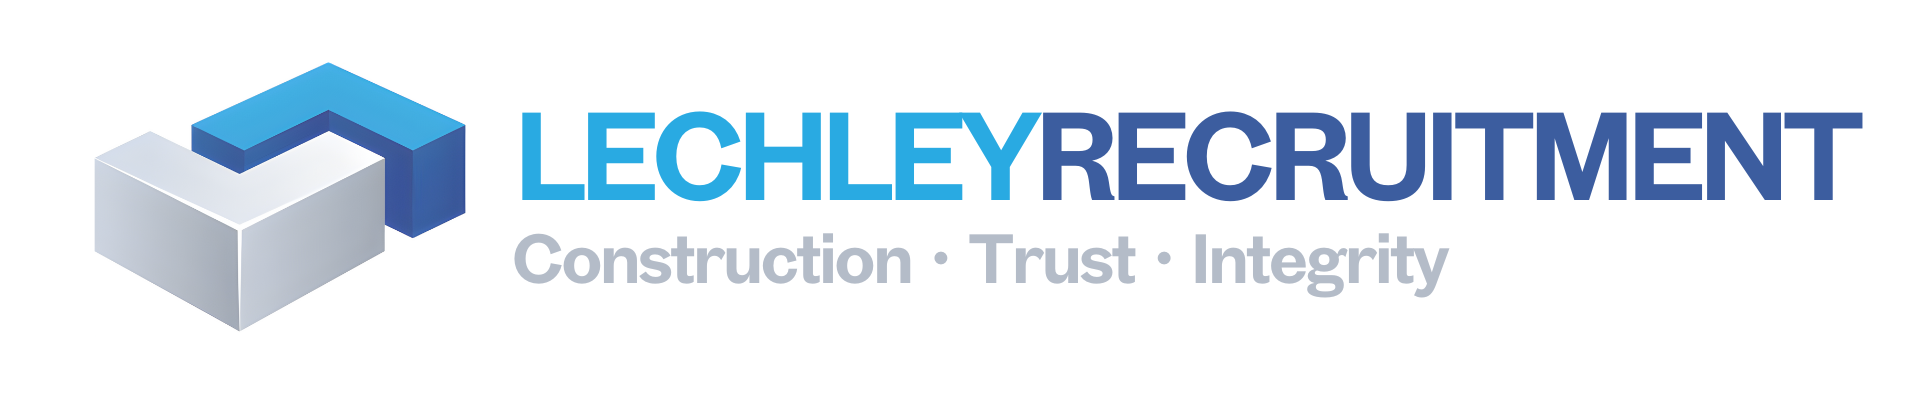 The logo for lechley associates recruitment specialists